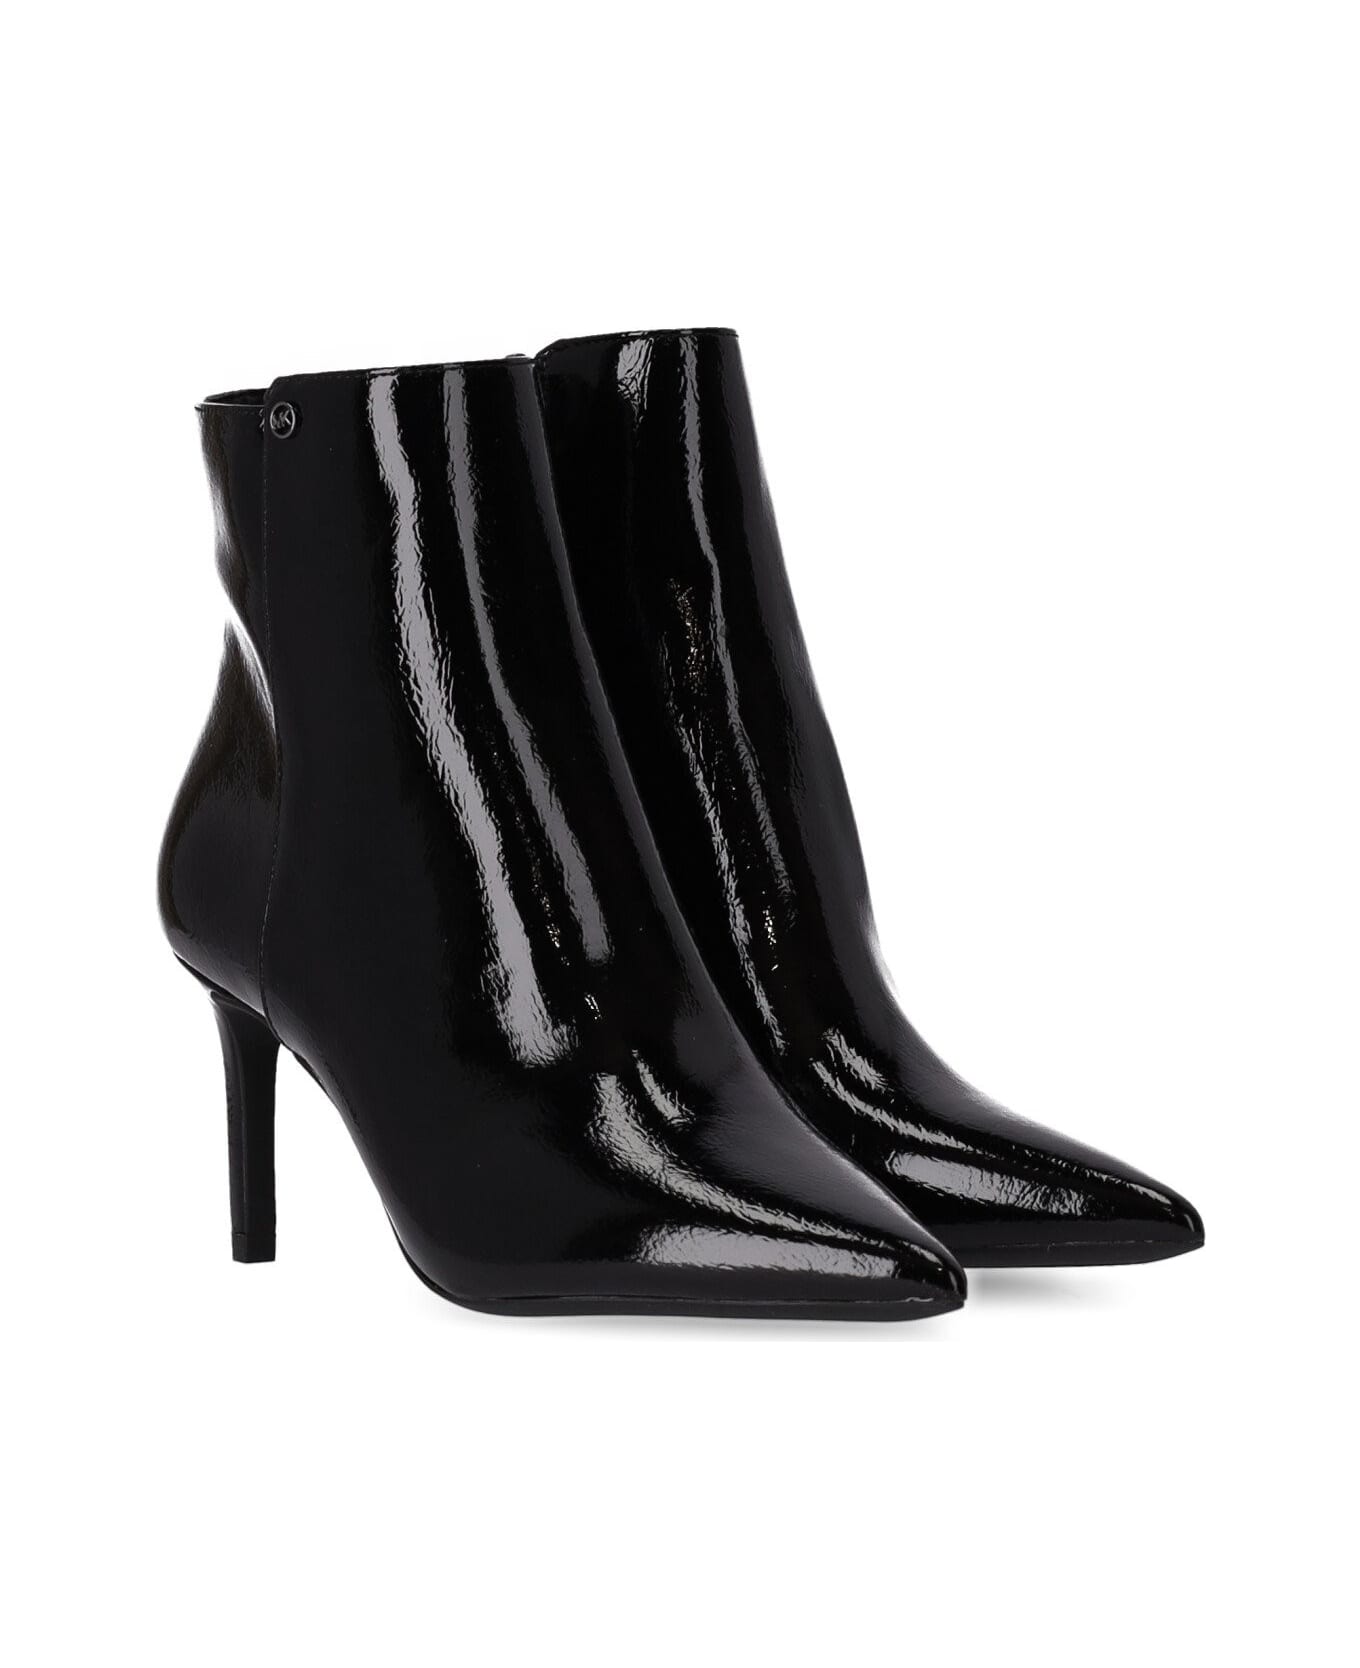 Michael Kors Polished Pointed Toe Ankle Boots - Nero